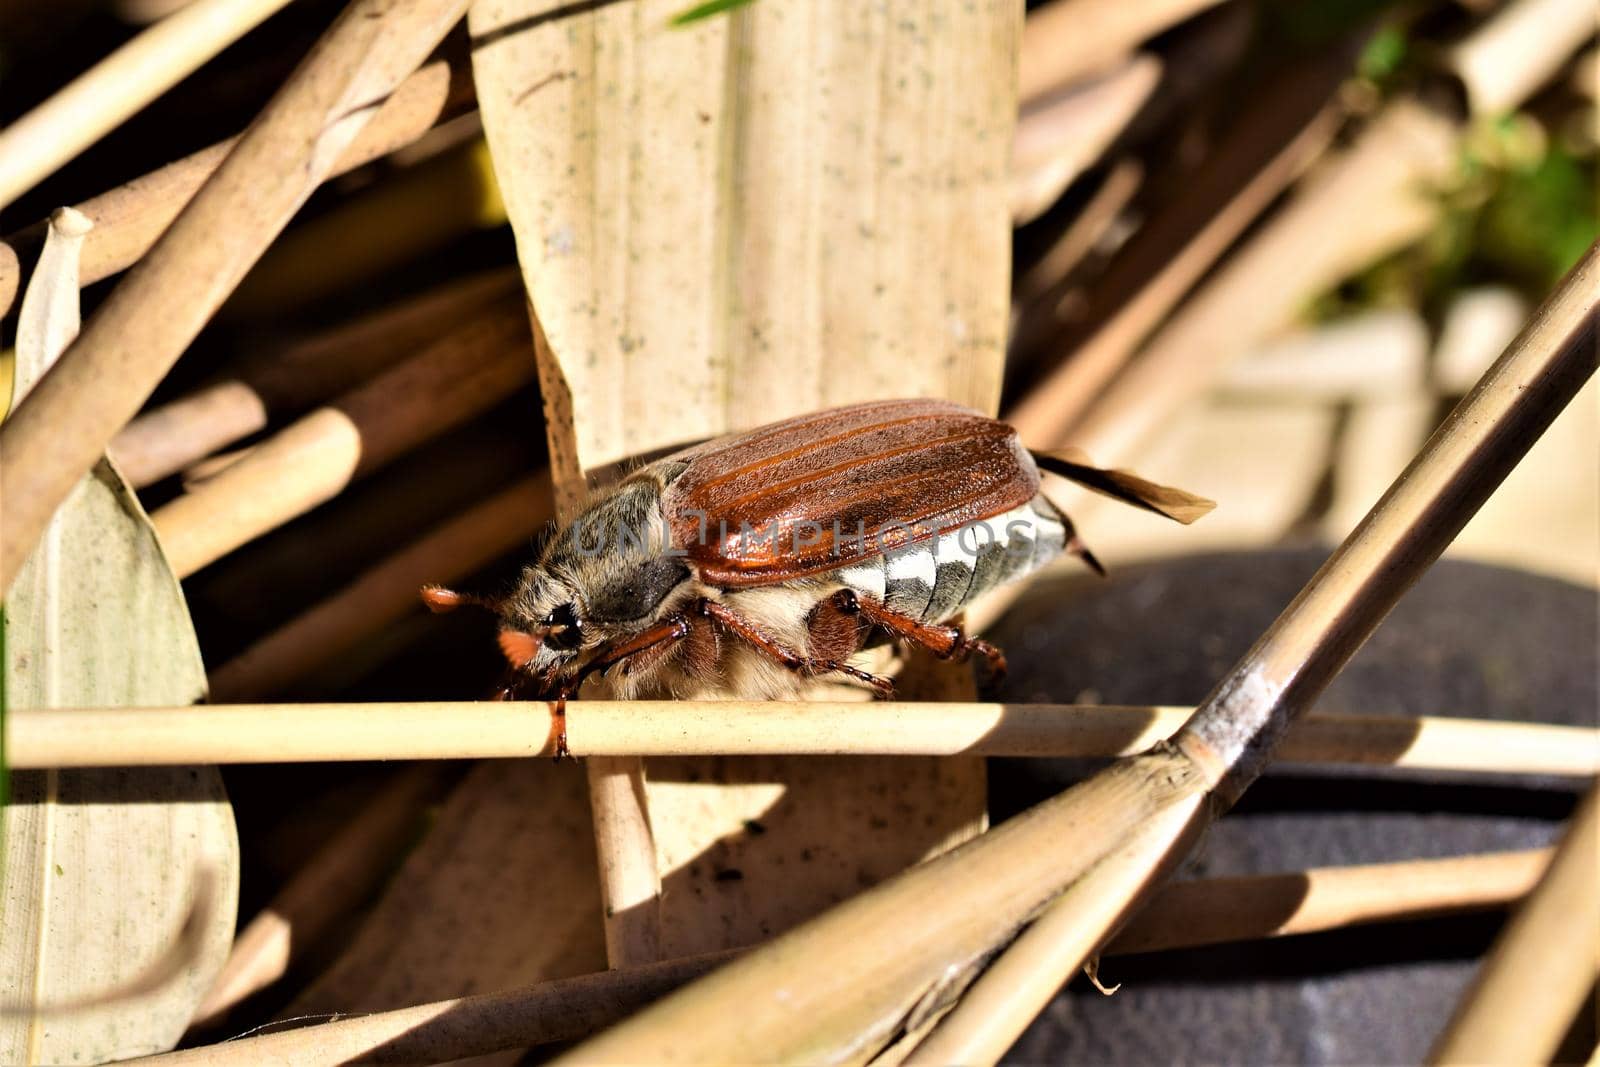 A may beetle walking on a dried bamboo stick